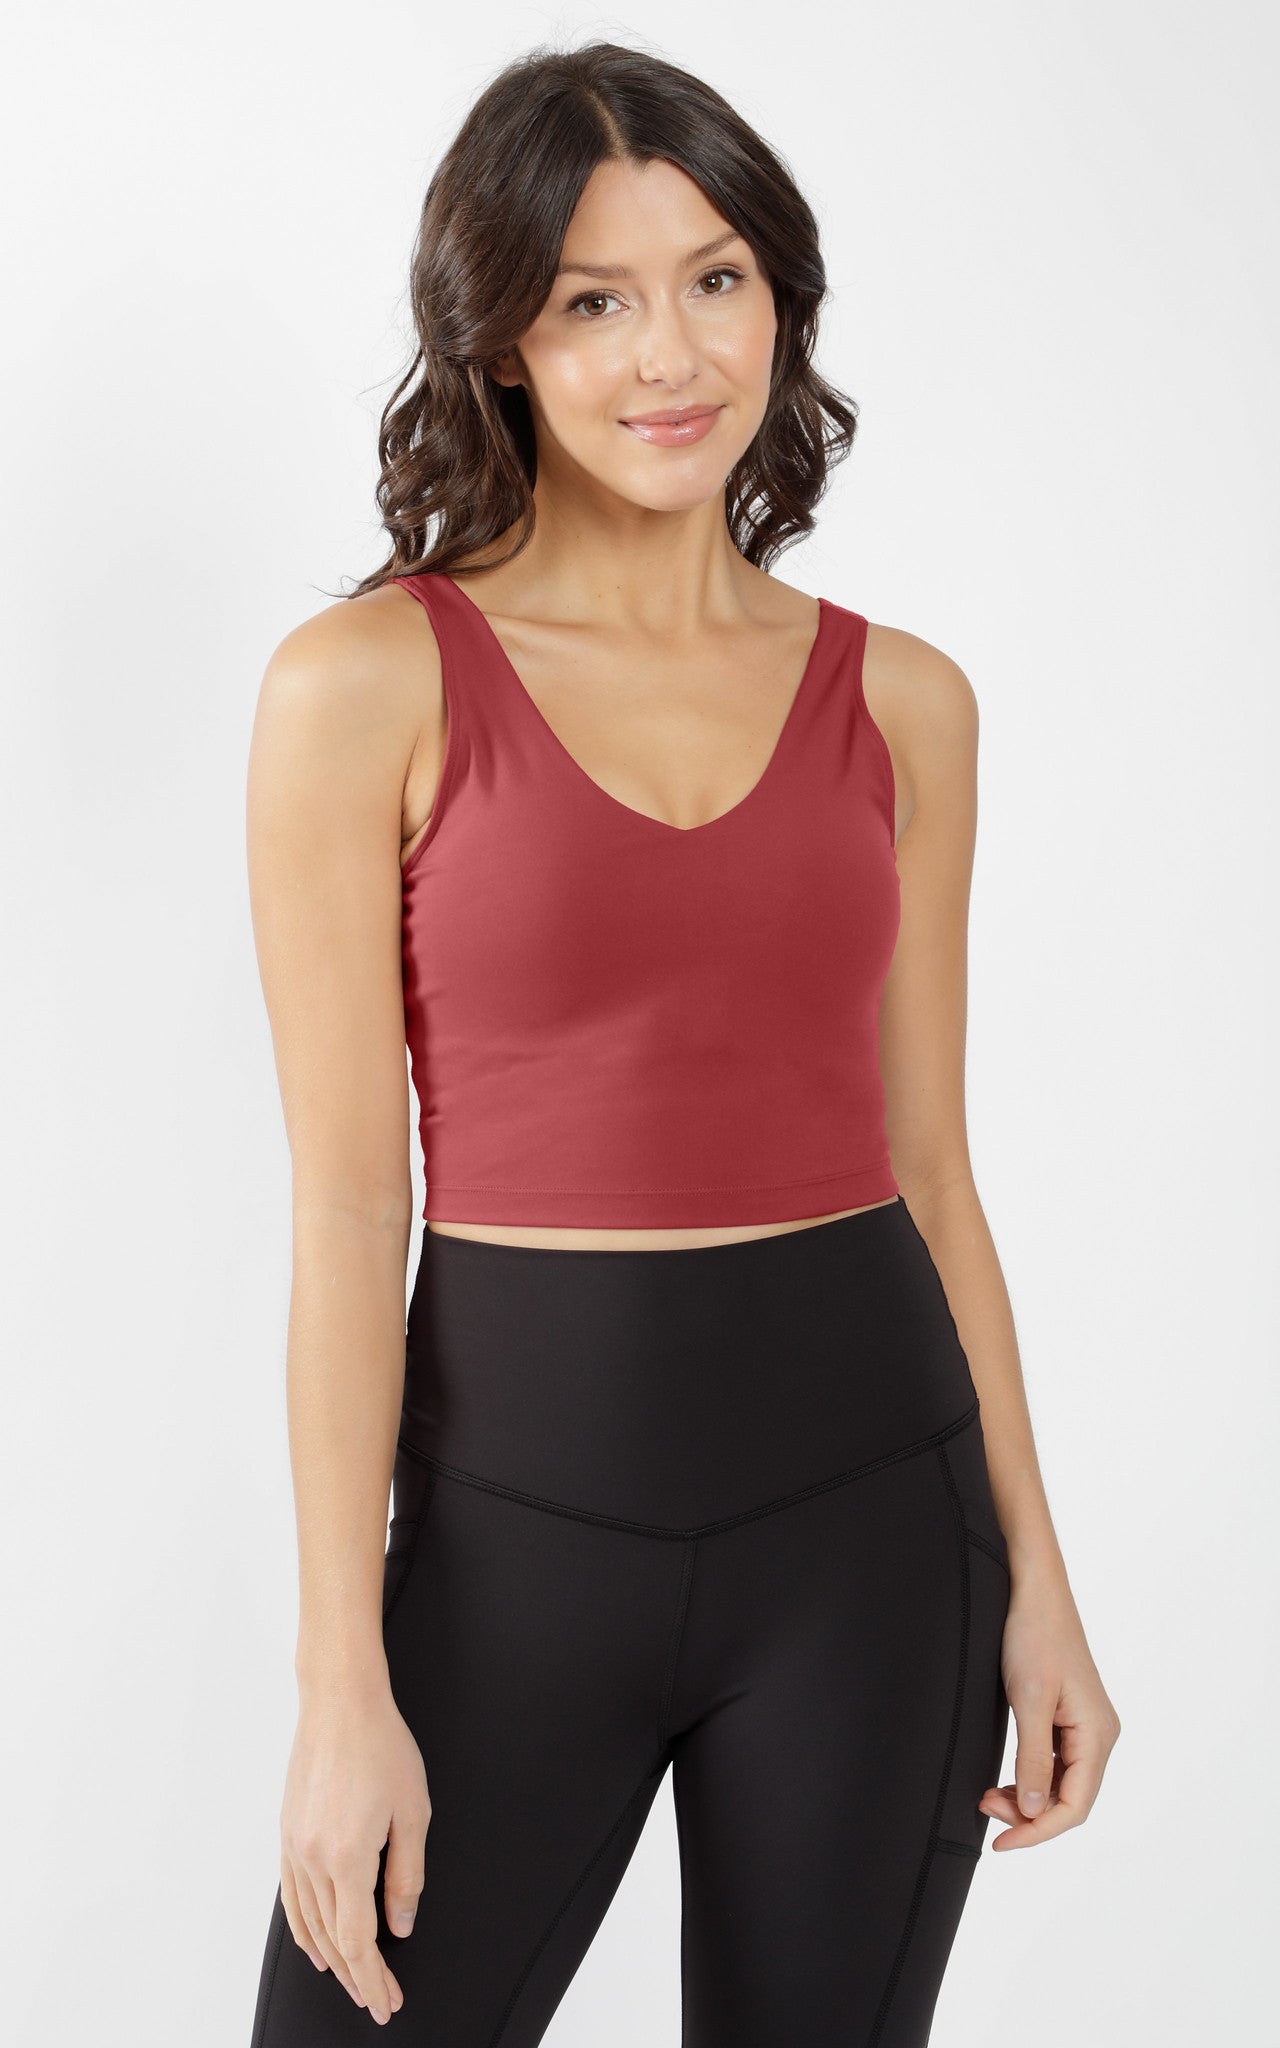 Cami Top with Built In Bra Padded Singlet – Undo Your Bra